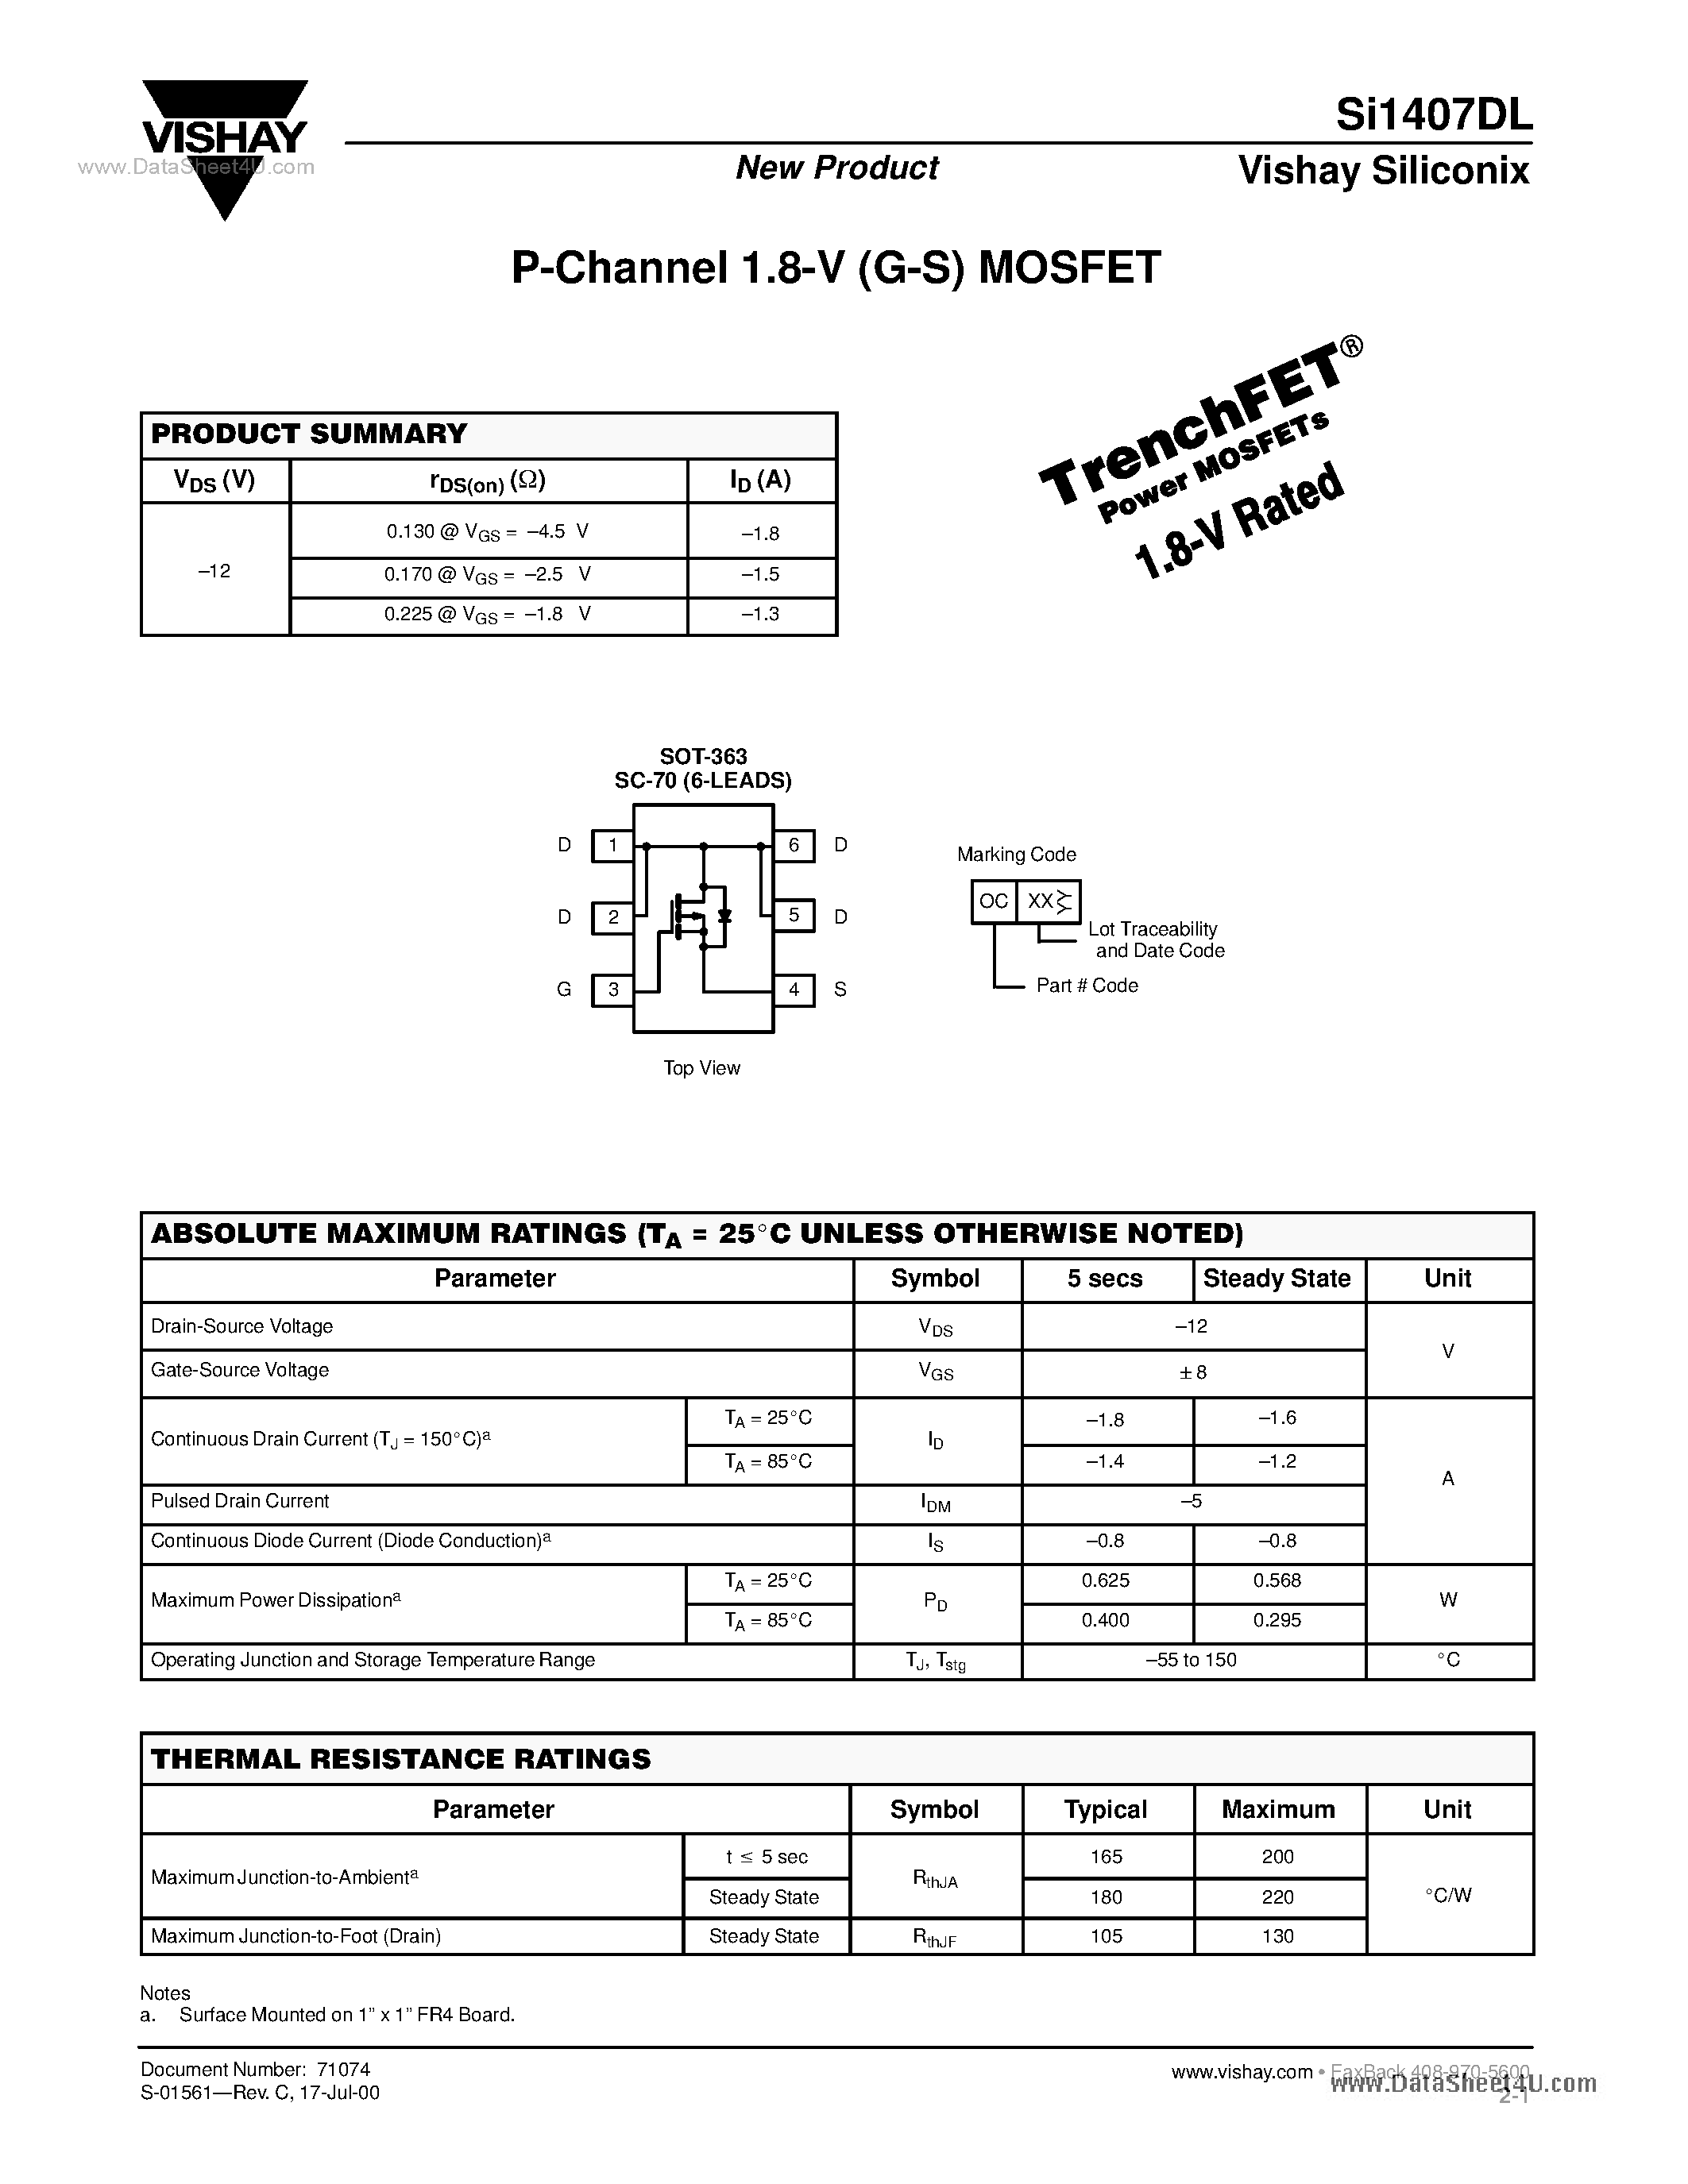 Datasheet SI1407DL - P-Channel 1.8-V (G-S) MOSFET page 1